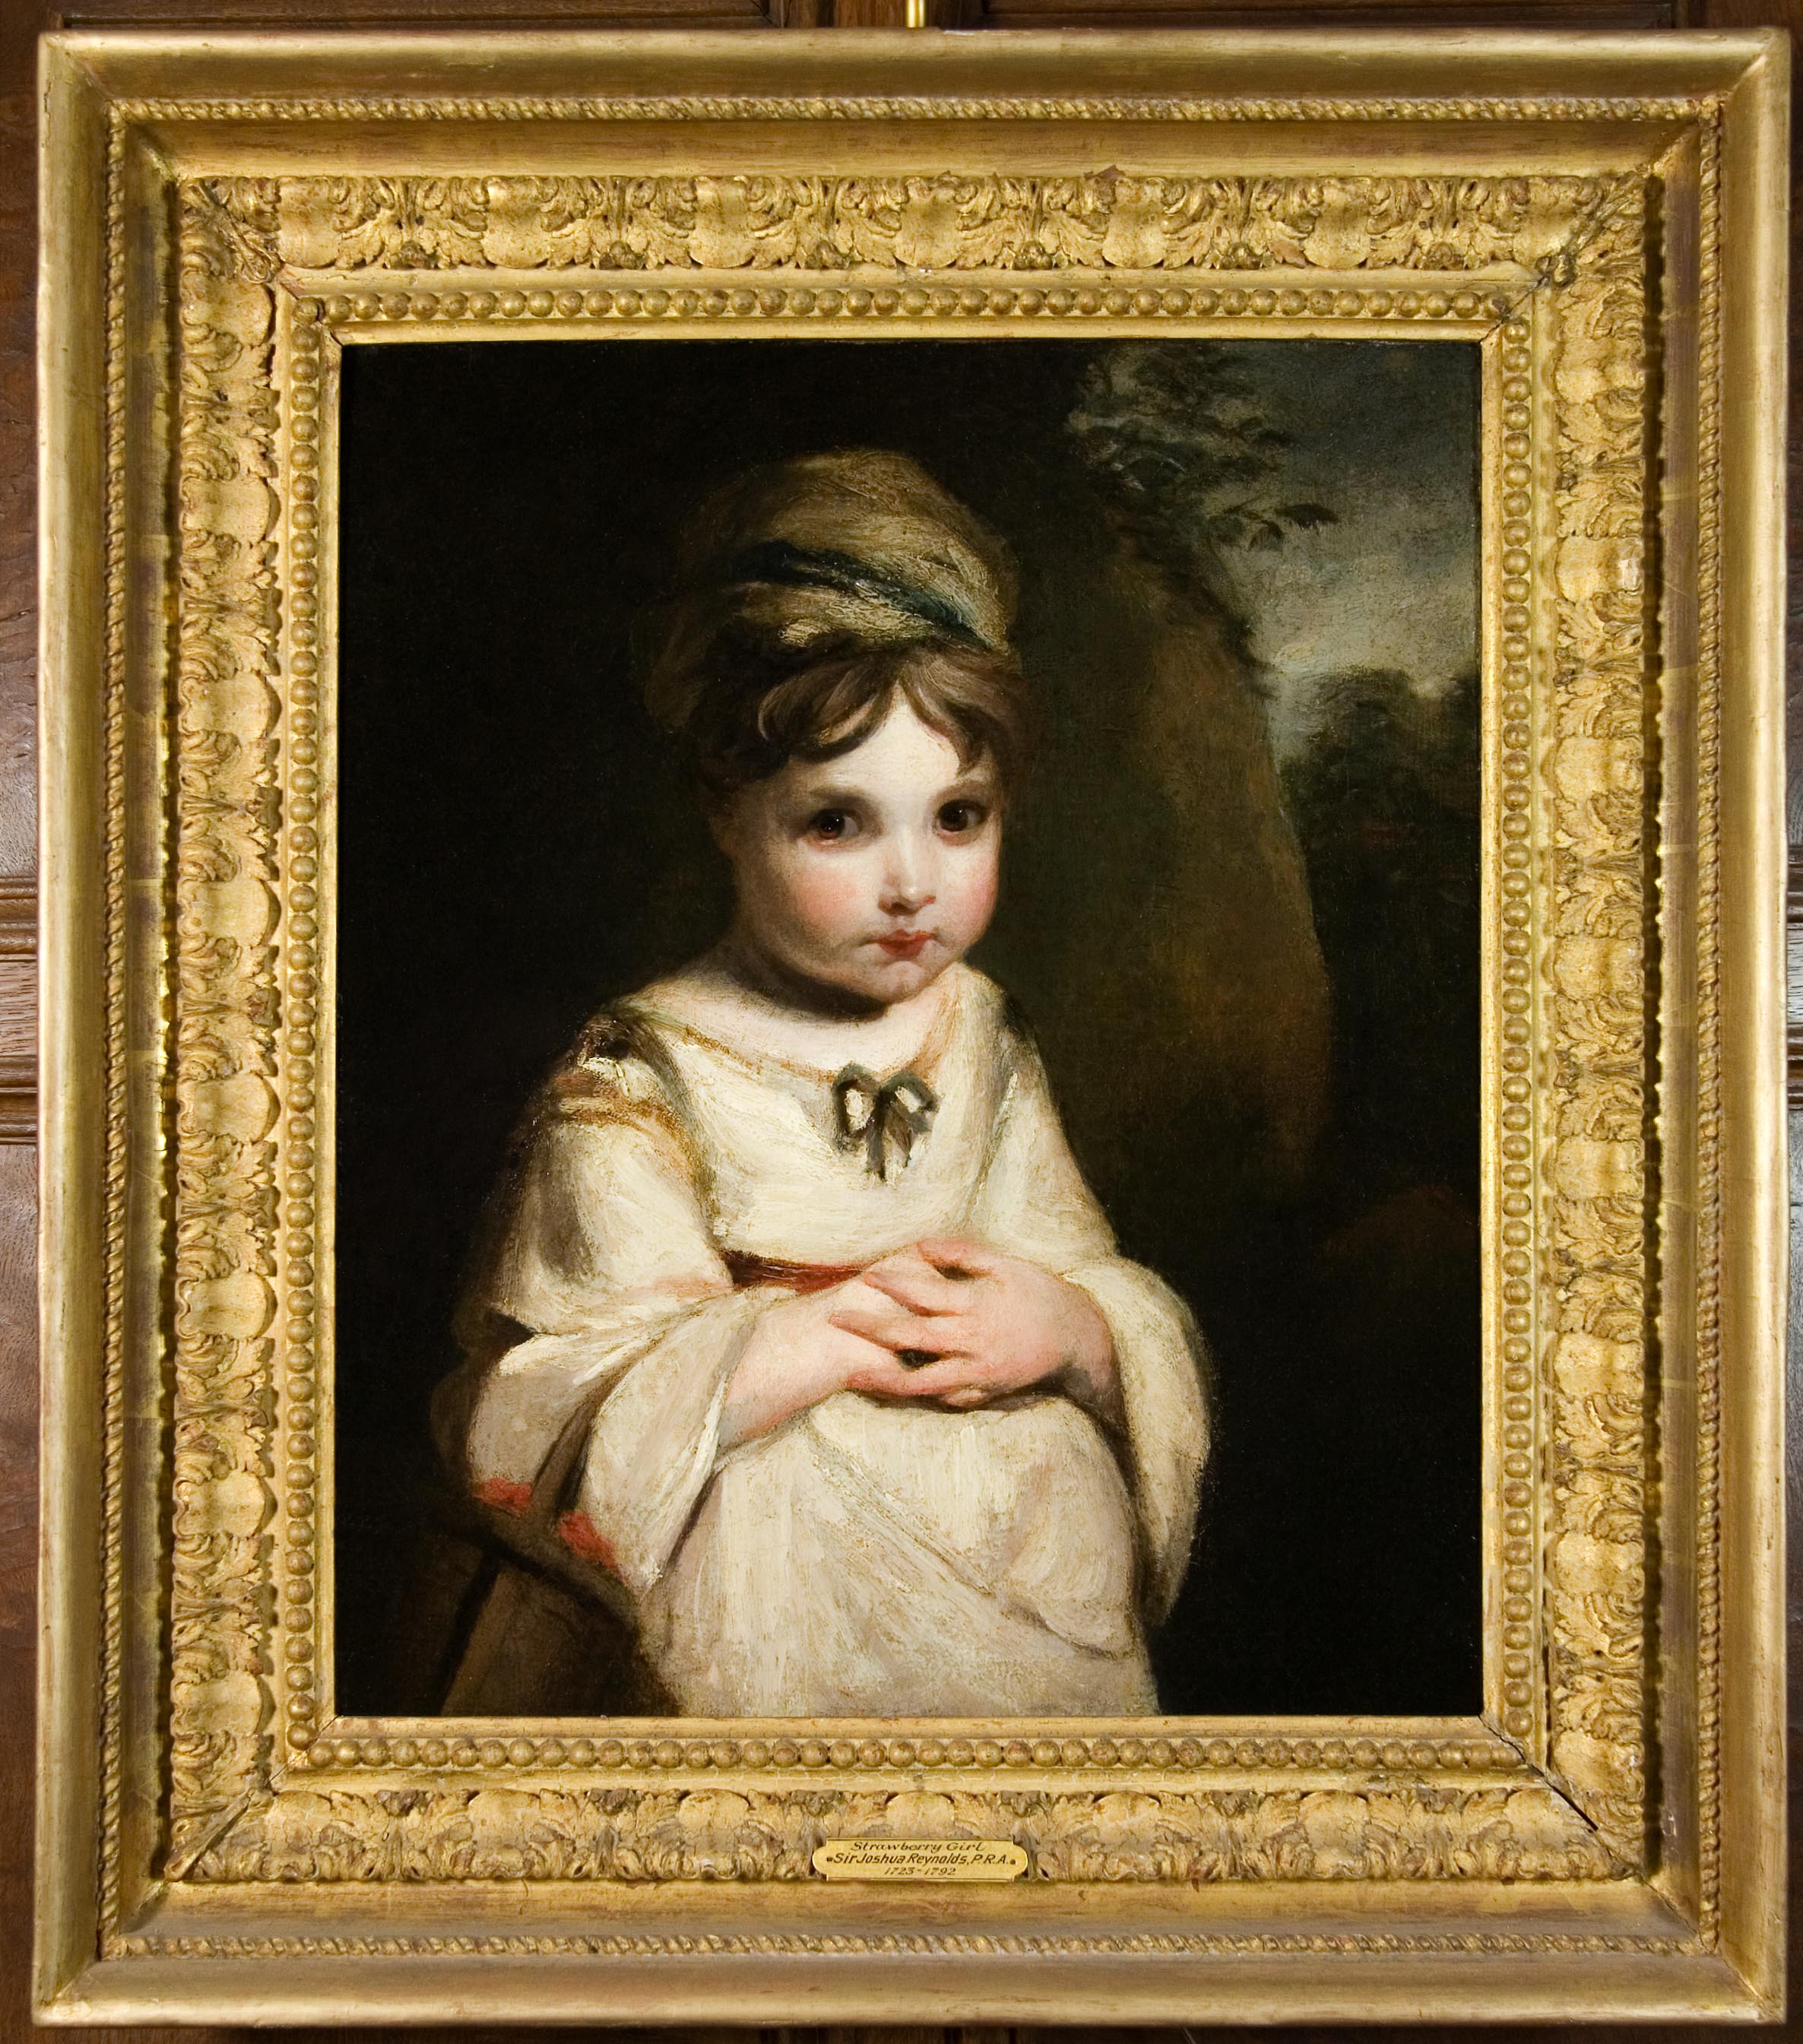 painting by Sir Joshua Reynolds of a young child